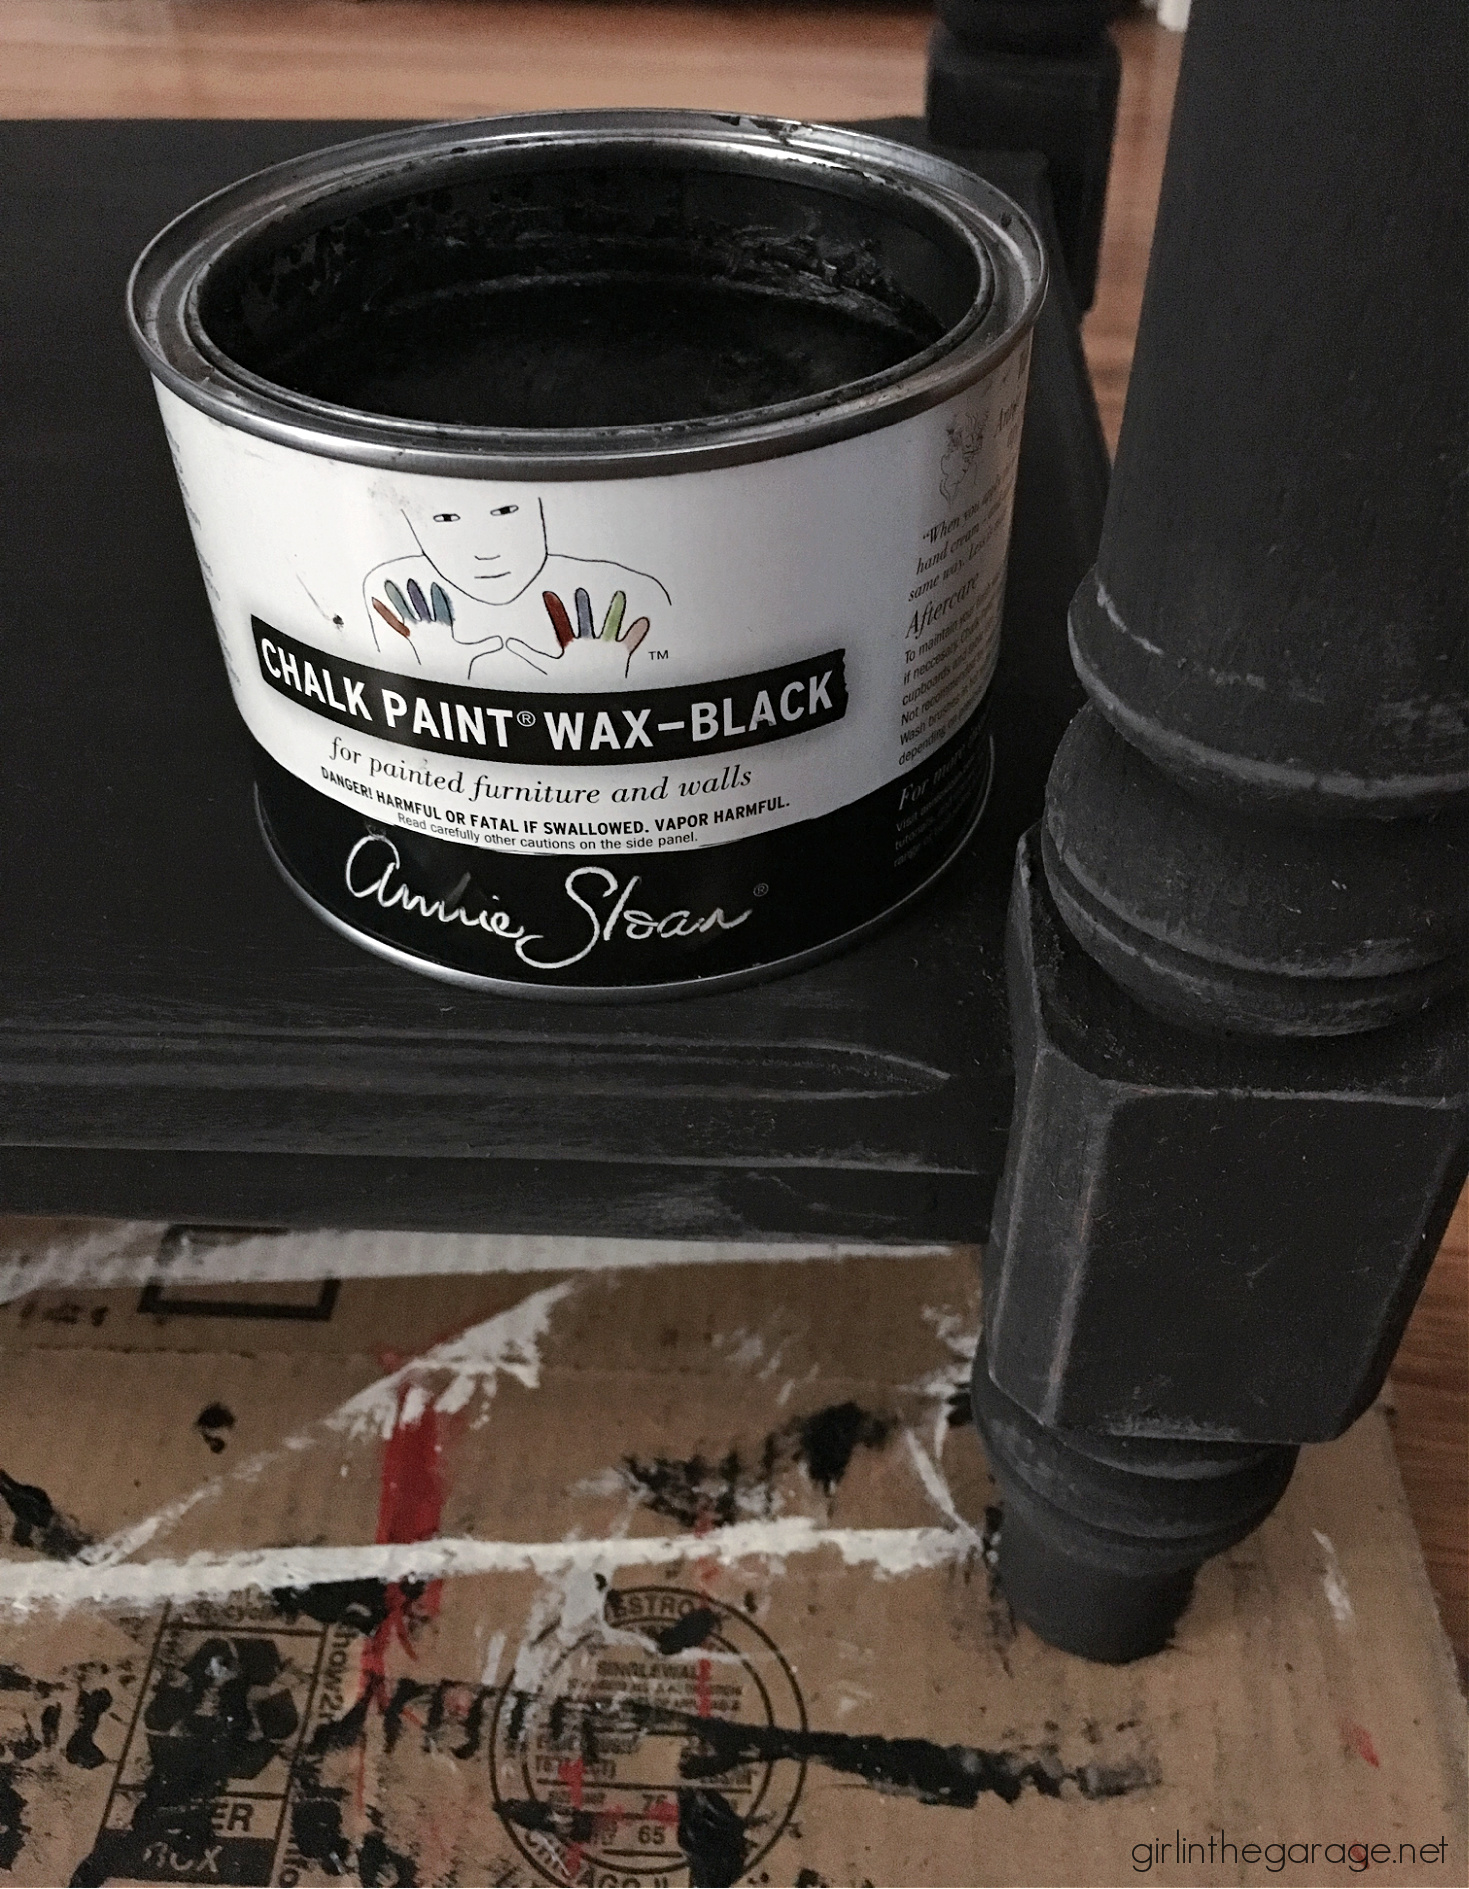 Use black Chalk Paint for stunning painted furniture! Learn how to Chalk Paint furniture with Athenian Black and black wax. Painted furniture ideas by Girl in the Garage